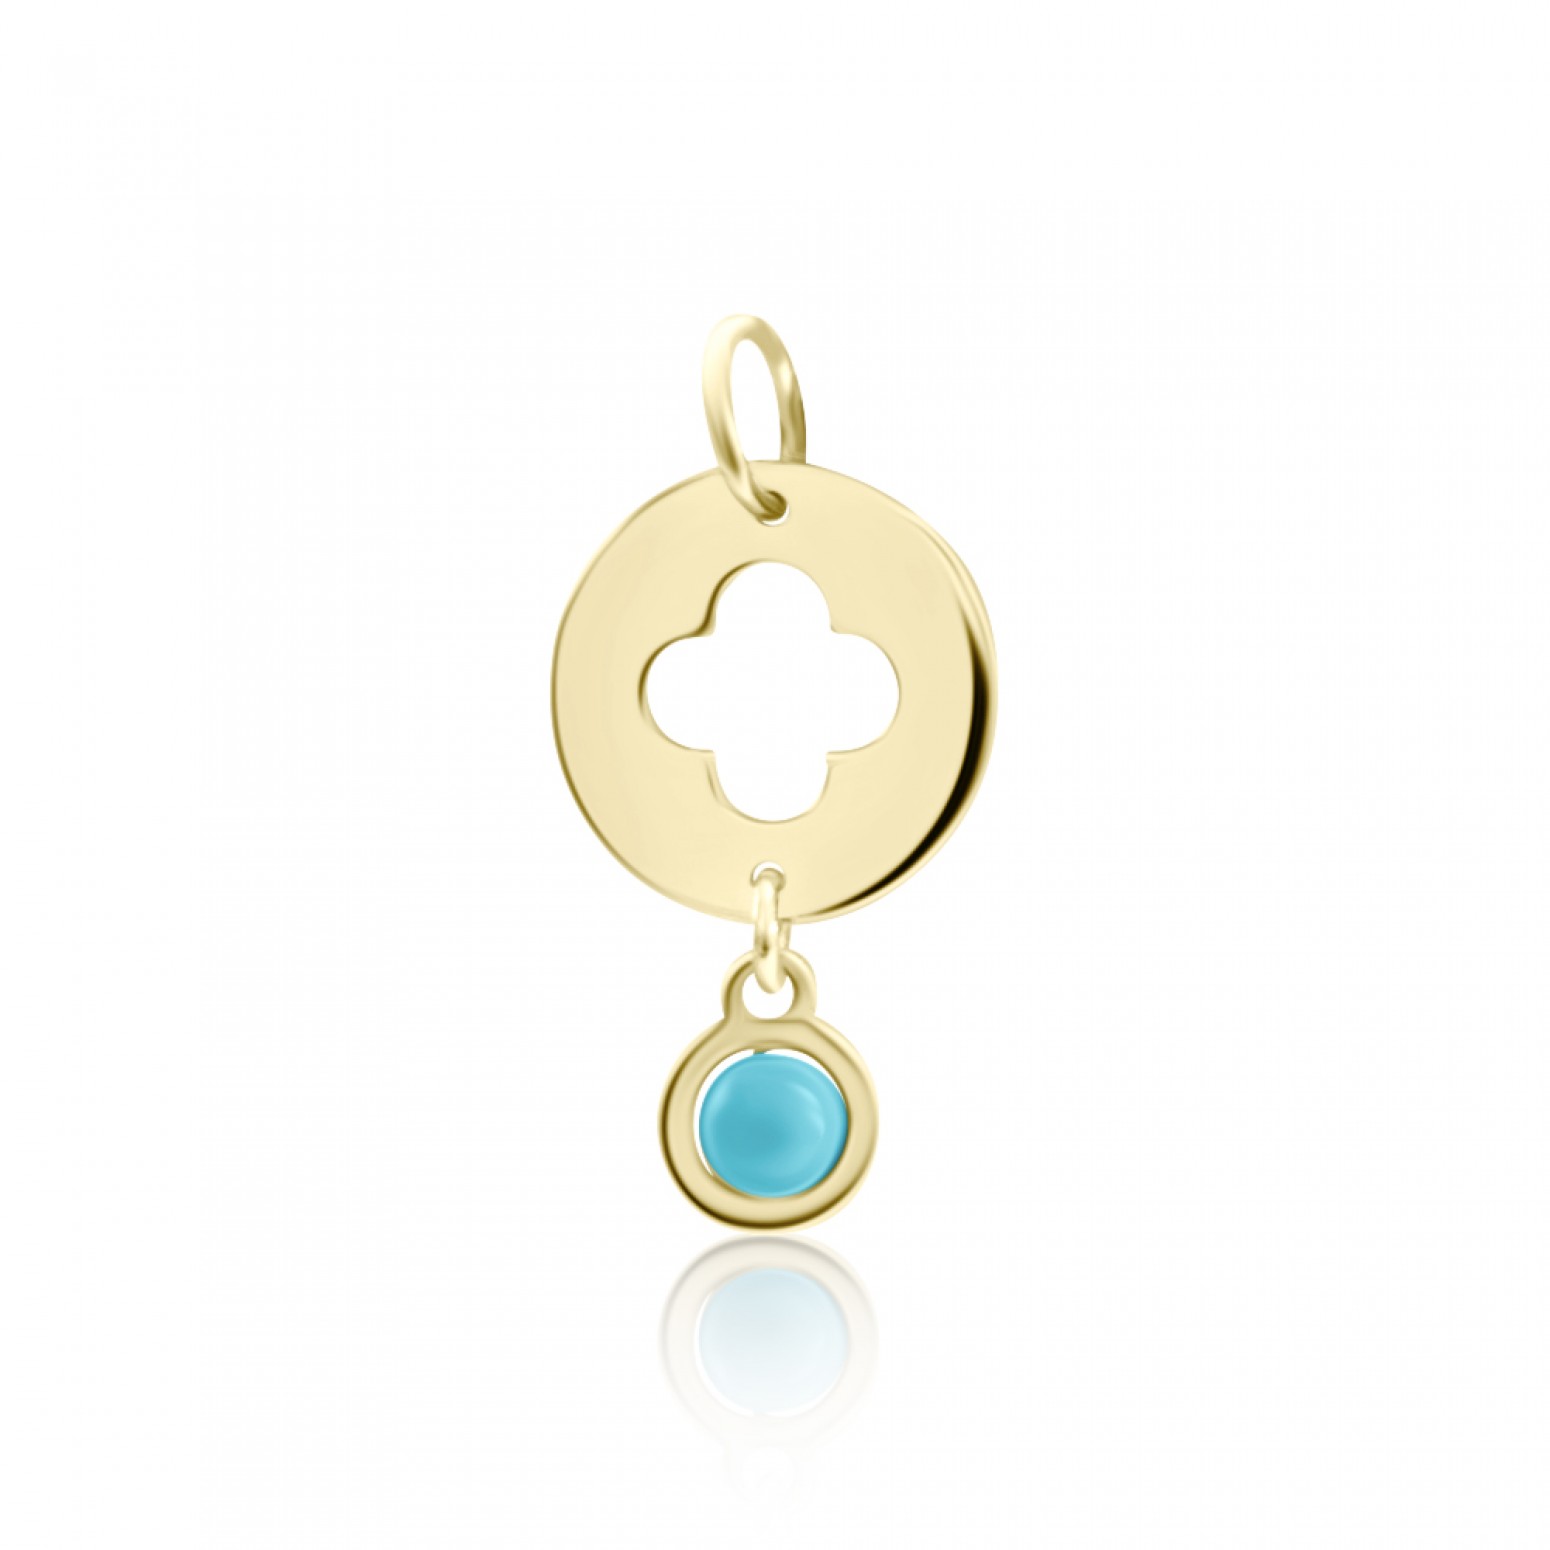 Babies pendant K14 gold with cross and turquoise, pm0167 BABIES Κοσμηματα - chrilia.gr